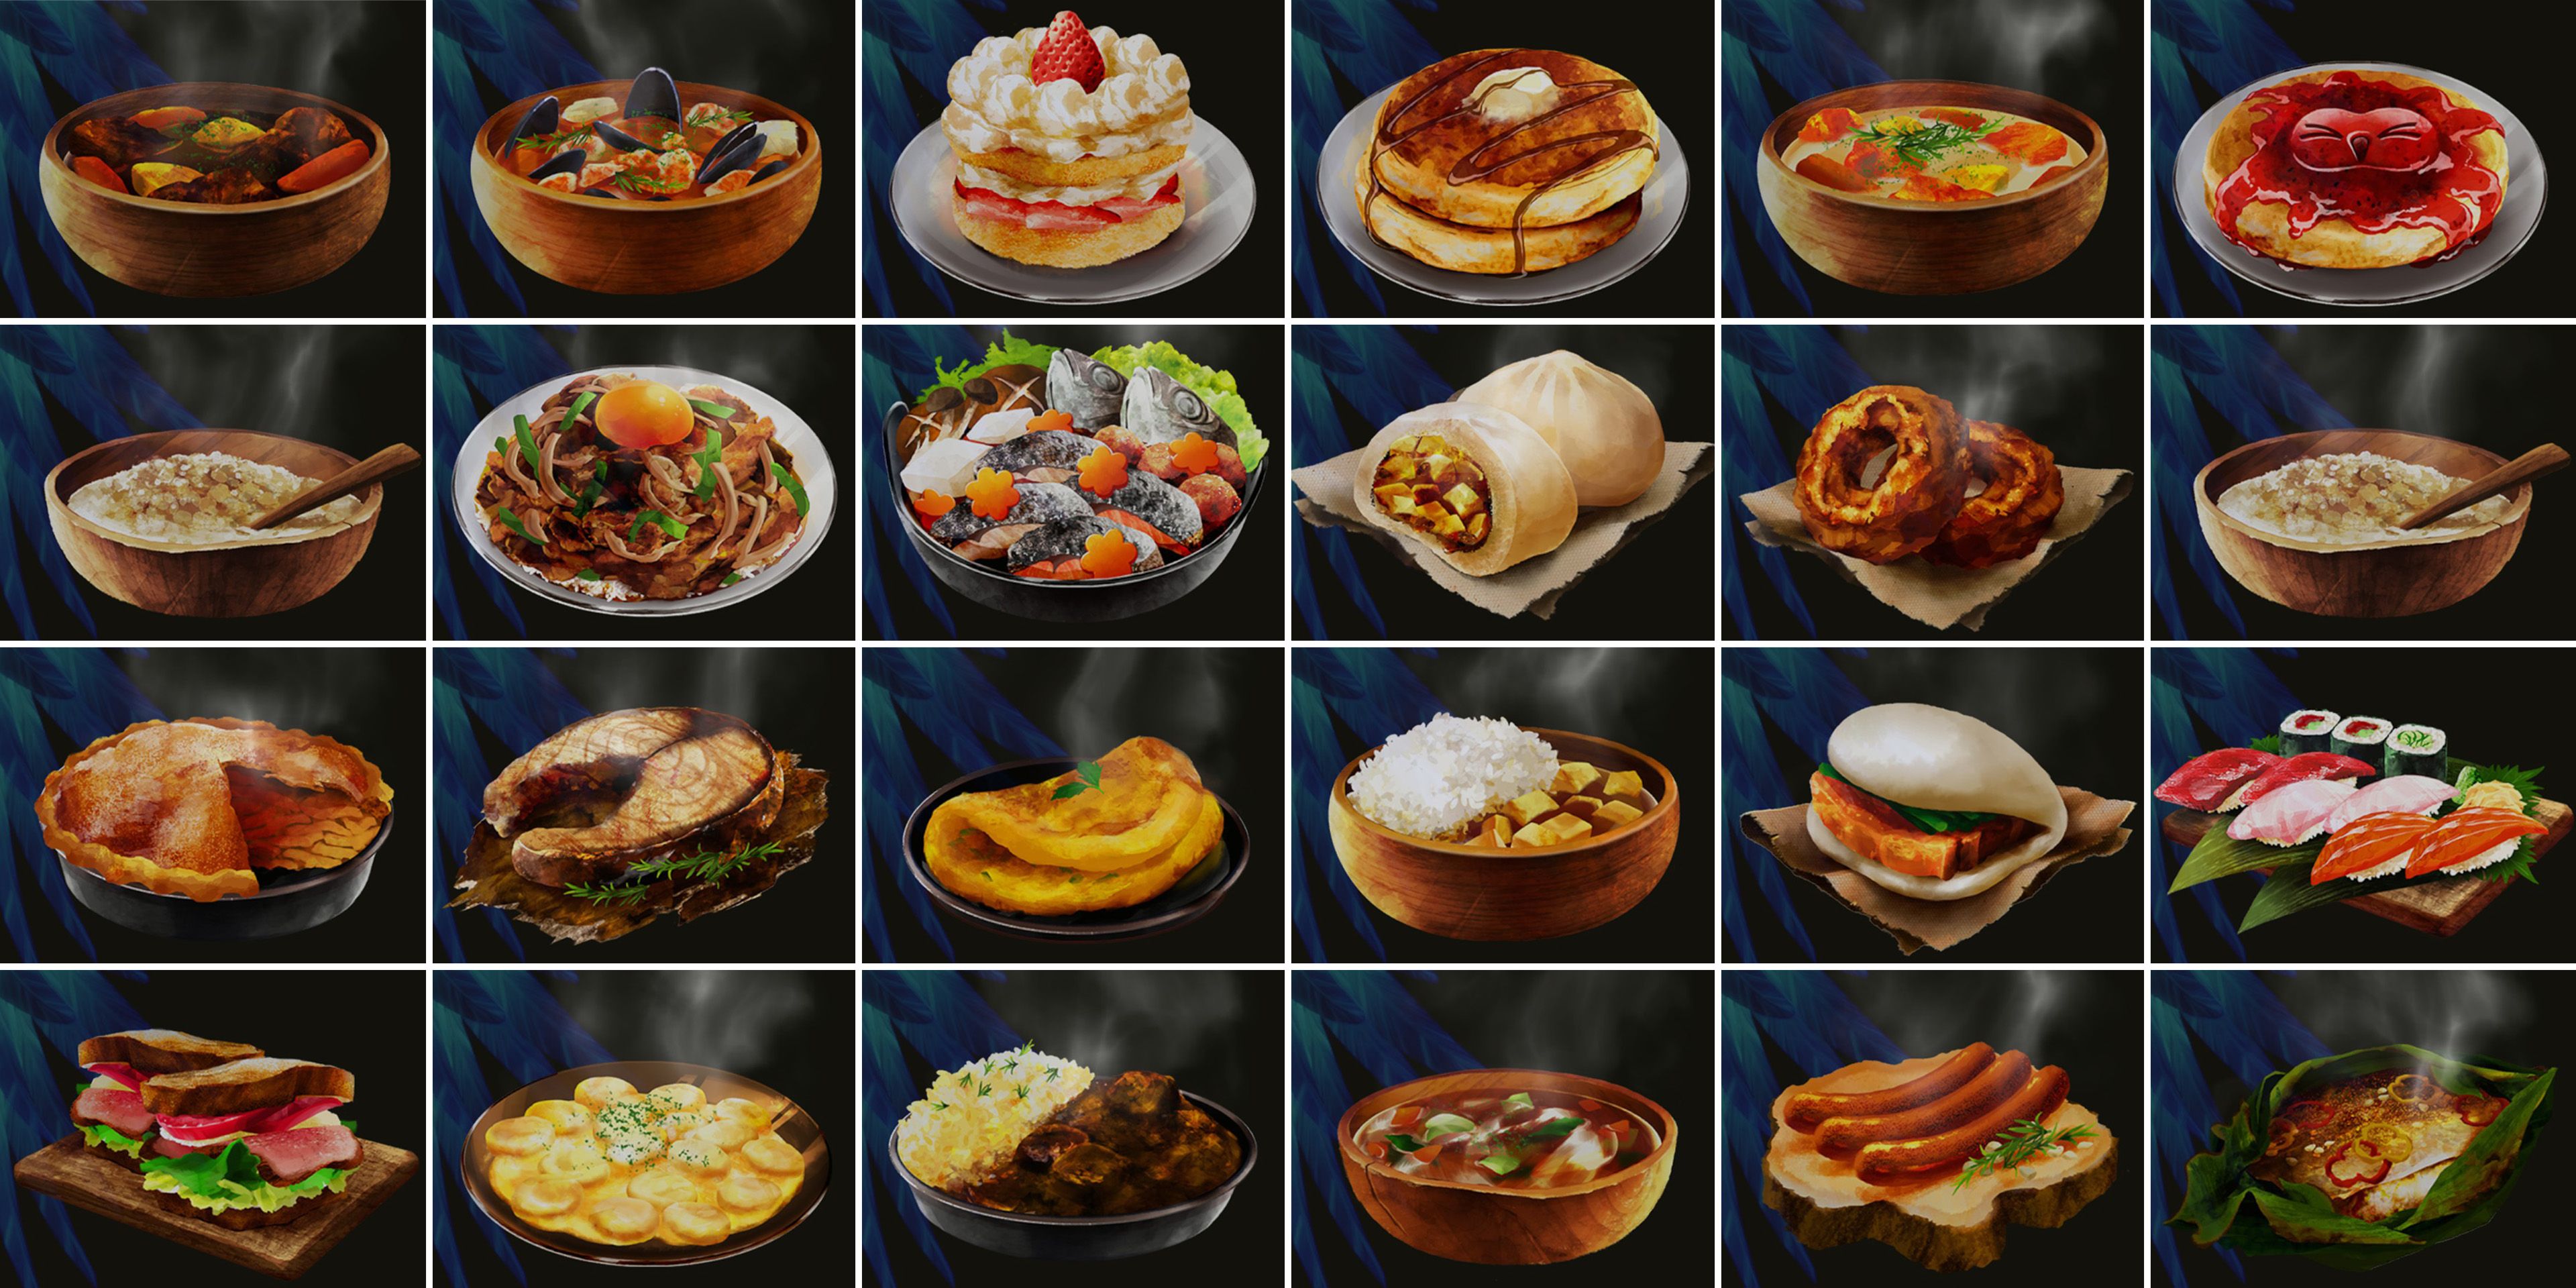 tales-of-arise-cooking-recipes-00-featured-image